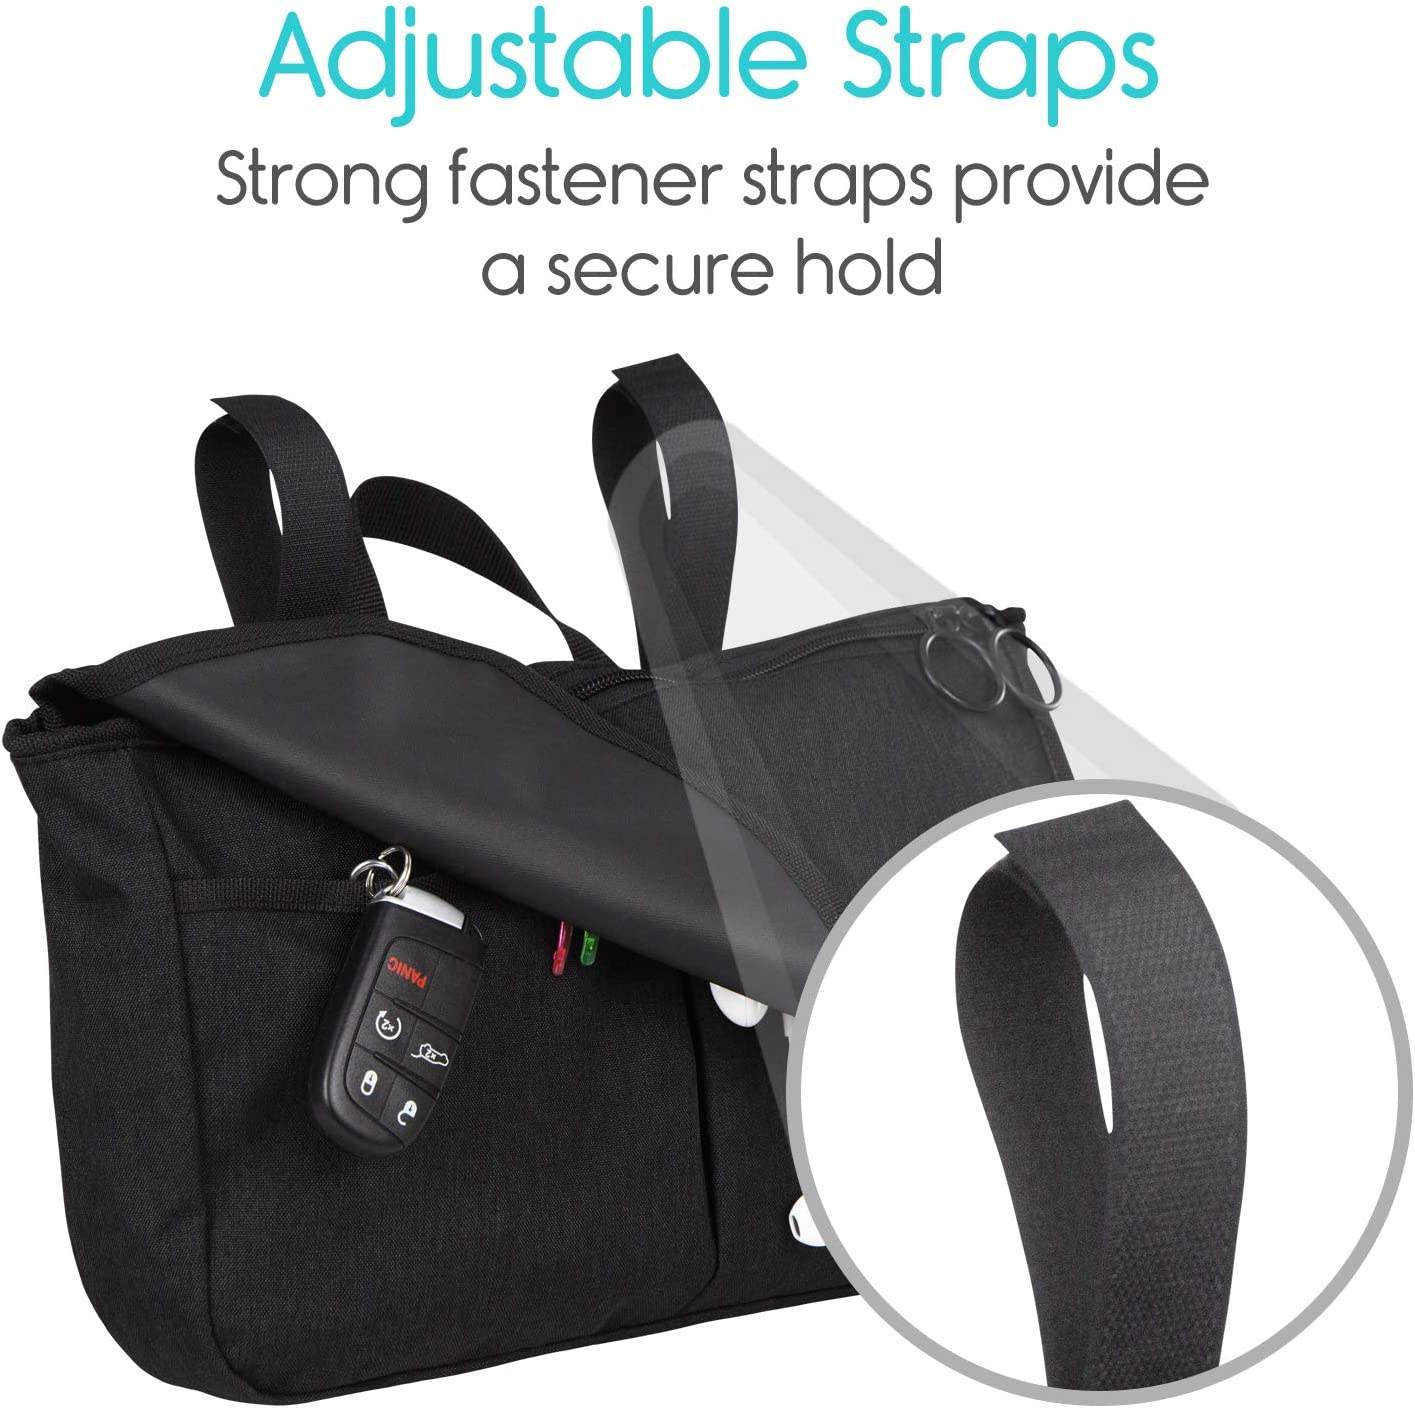 Wheelchair Carry Bag Arm Rest Pouch For Rollator Walkers Power Wheel Chairs And Knee Scooters Side Storage Organizer